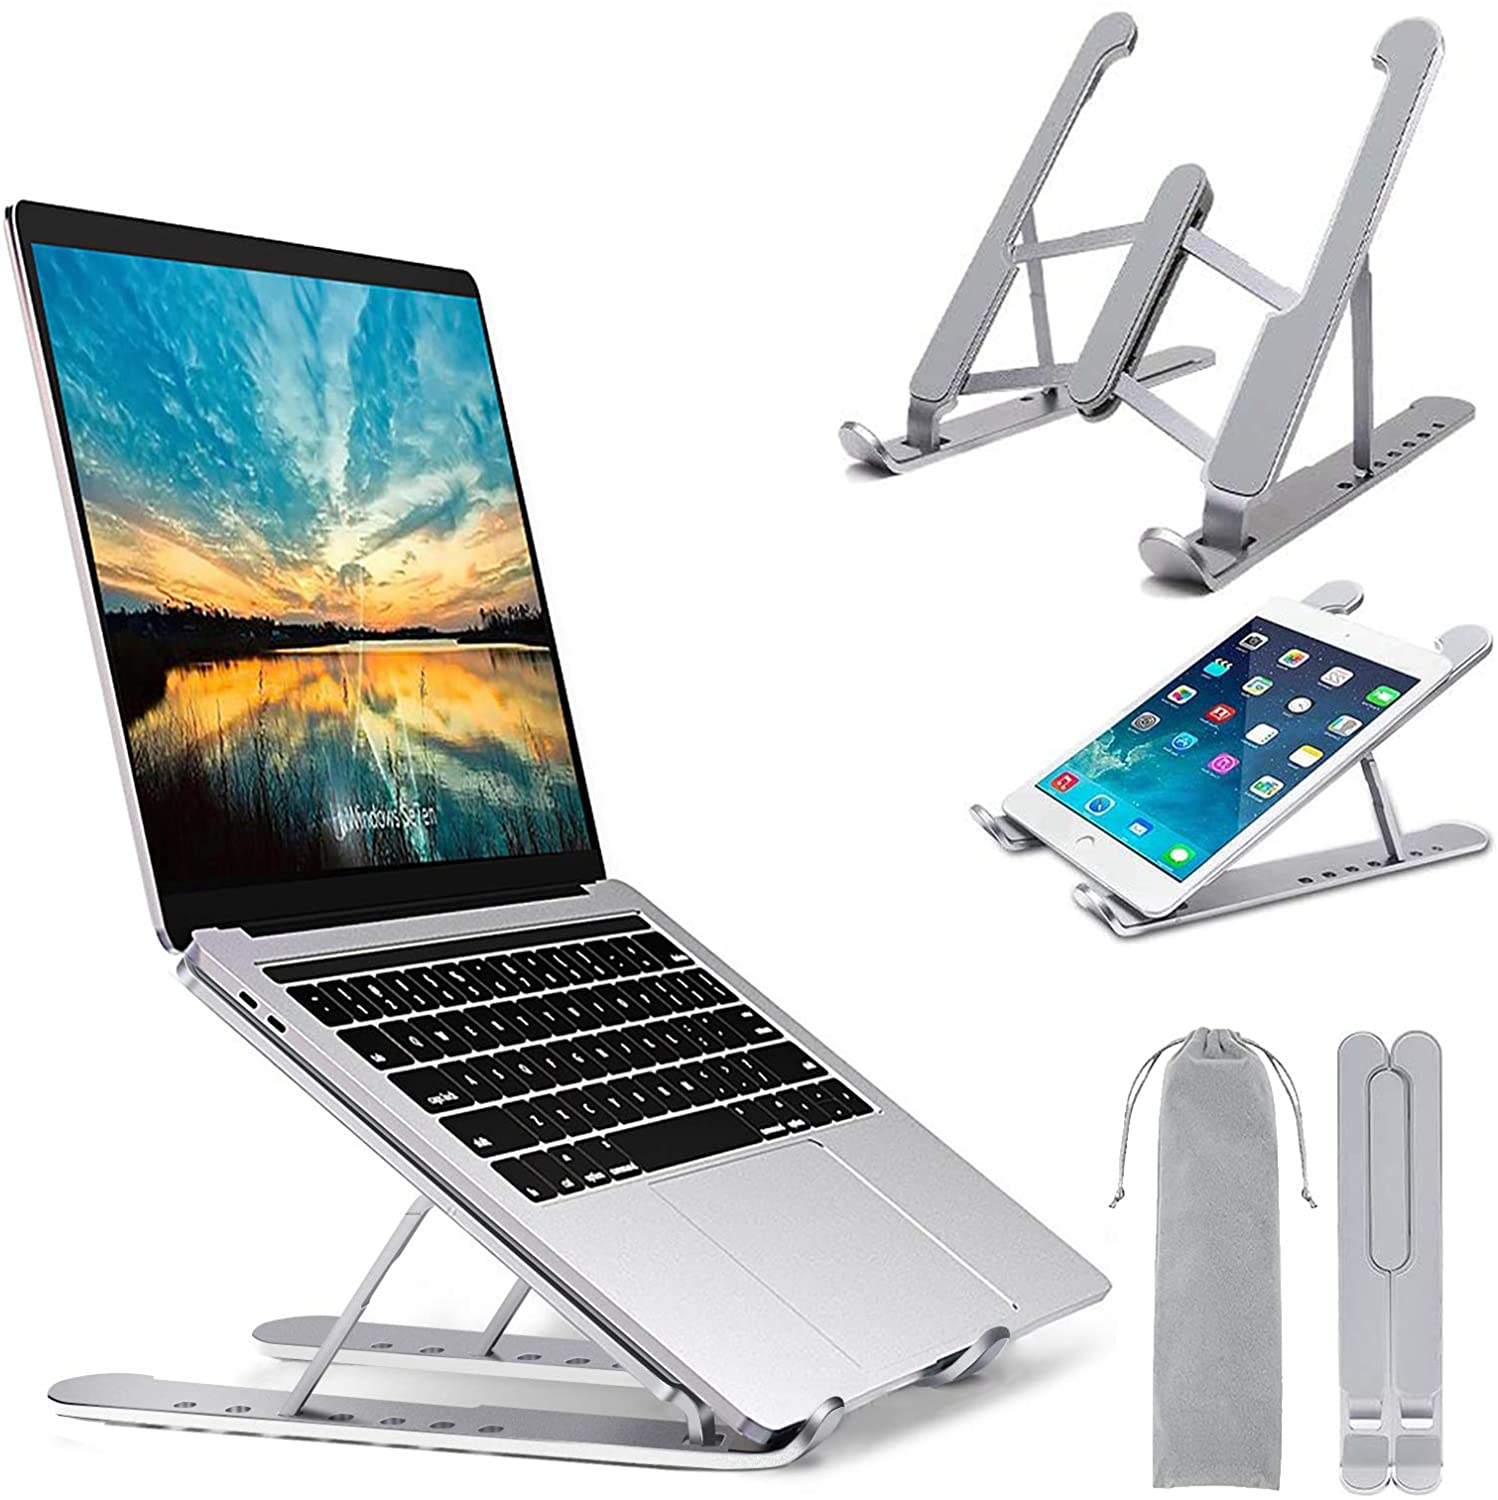 Lightweight and highly portable laptop stand.